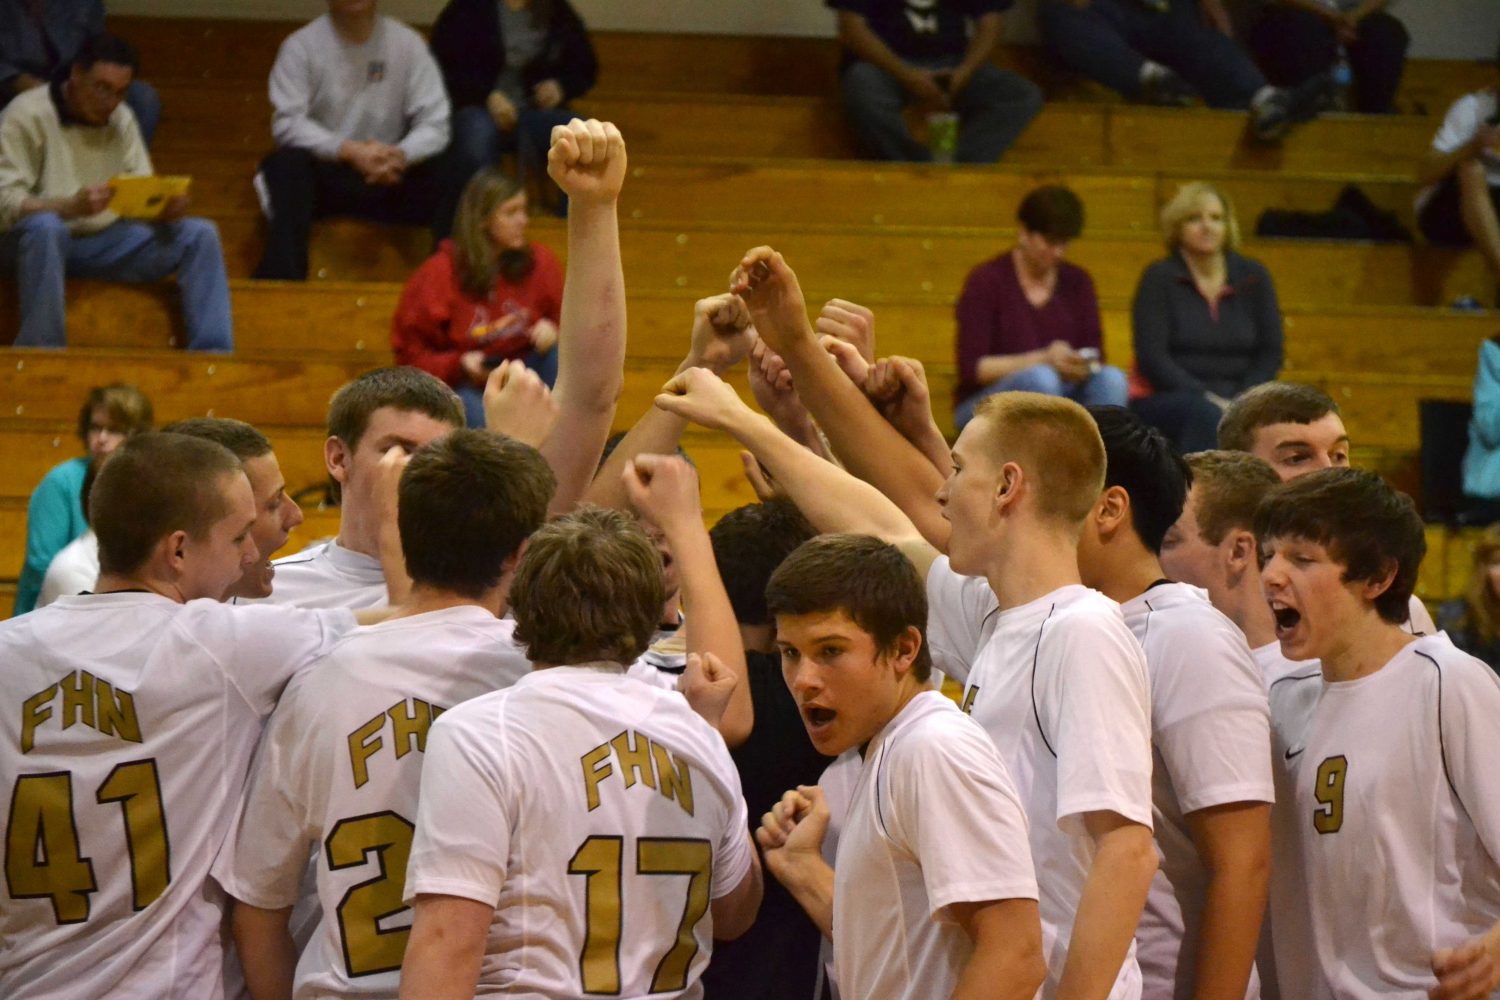 Watch+Now+FHN+Boys+Varsity+Takes+on+Fort+Zumwalt+North+in+Volleyball